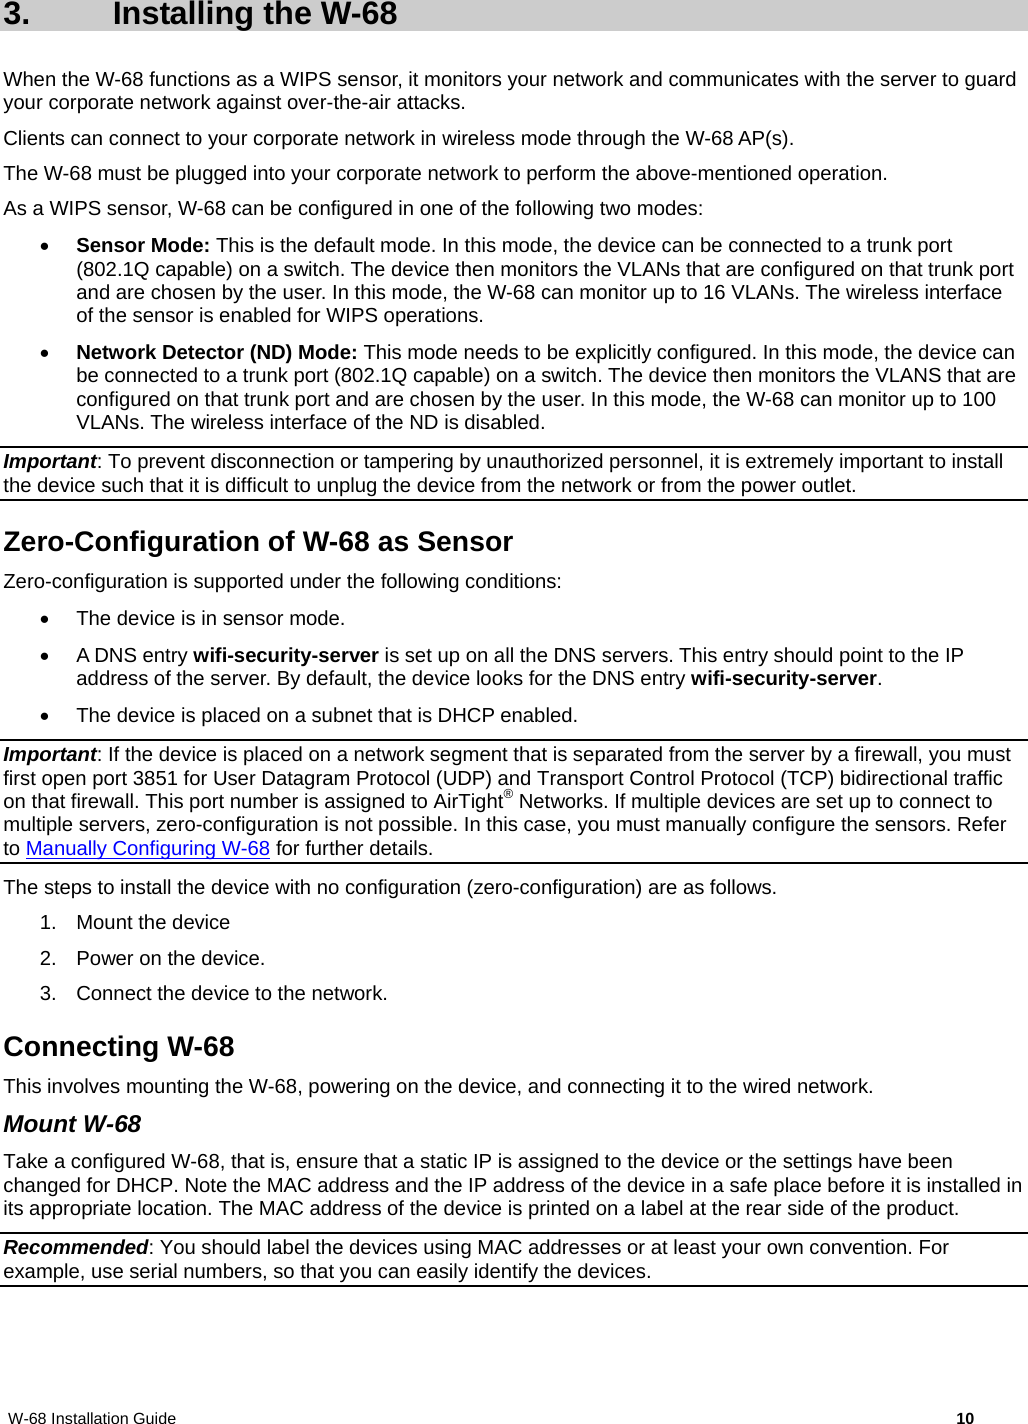 W-68 Installation Guide     10 3. Installing the W-68 When the W-68 functions as a WIPS sensor, it monitors your network and communicates with the server to guard your corporate network against over-the-air attacks. Clients can connect to your corporate network in wireless mode through the W-68 AP(s).  The W-68 must be plugged into your corporate network to perform the above-mentioned operation. As a WIPS sensor, W-68 can be configured in one of the following two modes:  Sensor Mode: This is the default mode. In this mode, the device can be connected to a trunk port (802.1Q capable) on a switch. The device then monitors the VLANs that are configured on that trunk port and are chosen by the user. In this mode, the W-68 can monitor up to 16 VLANs. The wireless interface of the sensor is enabled for WIPS operations.  Network Detector (ND) Mode: This mode needs to be explicitly configured. In this mode, the device can be connected to a trunk port (802.1Q capable) on a switch. The device then monitors the VLANS that are configured on that trunk port and are chosen by the user. In this mode, the W-68 can monitor up to 100 VLANs. The wireless interface of the ND is disabled. Important: To prevent disconnection or tampering by unauthorized personnel, it is extremely important to install the device such that it is difficult to unplug the device from the network or from the power outlet. Zero-Configuration of W-68 as Sensor Zero-configuration is supported under the following conditions:   The device is in sensor mode.    A DNS entry wifi-security-server is set up on all the DNS servers. This entry should point to the IP address of the server. By default, the device looks for the DNS entry wifi-security-server.   The device is placed on a subnet that is DHCP enabled. Important: If the device is placed on a network segment that is separated from the server by a firewall, you must first open port 3851 for User Datagram Protocol (UDP) and Transport Control Protocol (TCP) bidirectional traffic on that firewall. This port number is assigned to AirTight® Networks. If multiple devices are set up to connect to multiple servers, zero-configuration is not possible. In this case, you must manually configure the sensors. Refer to Manually Configuring W-68 for further details. The steps to install the device with no configuration (zero-configuration) are as follows. 1. Mount the device 2.  Power on the device. 3.  Connect the device to the network. Connecting W-68 This involves mounting the W-68, powering on the device, and connecting it to the wired network. Mount W-68 Take a configured W-68, that is, ensure that a static IP is assigned to the device or the settings have been changed for DHCP. Note the MAC address and the IP address of the device in a safe place before it is installed in its appropriate location. The MAC address of the device is printed on a label at the rear side of the product. Recommended: You should label the devices using MAC addresses or at least your own convention. For example, use serial numbers, so that you can easily identify the devices. 